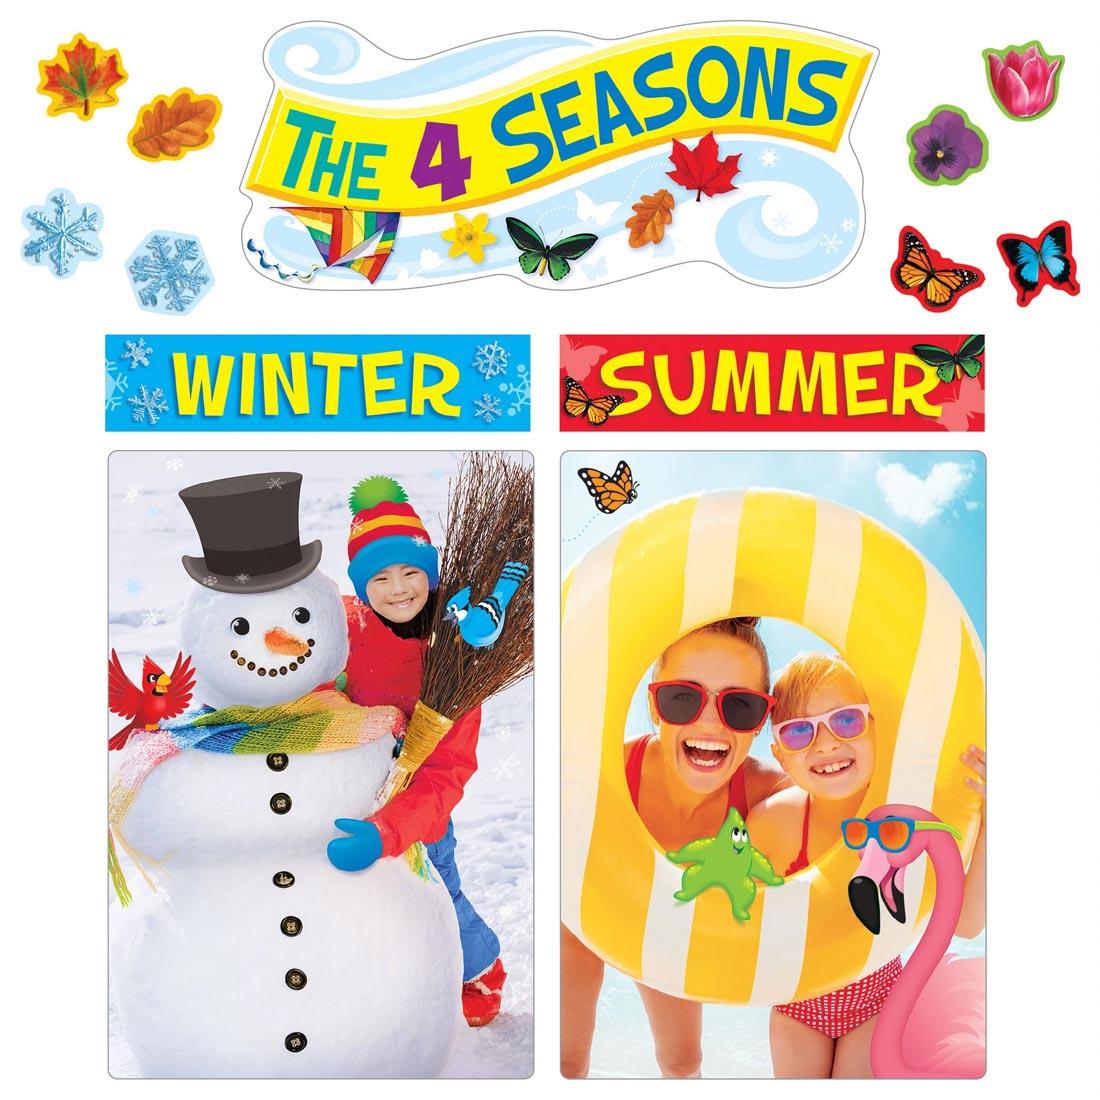 Winter and Summer posters from the TREND The 4 Seasons Learning Set